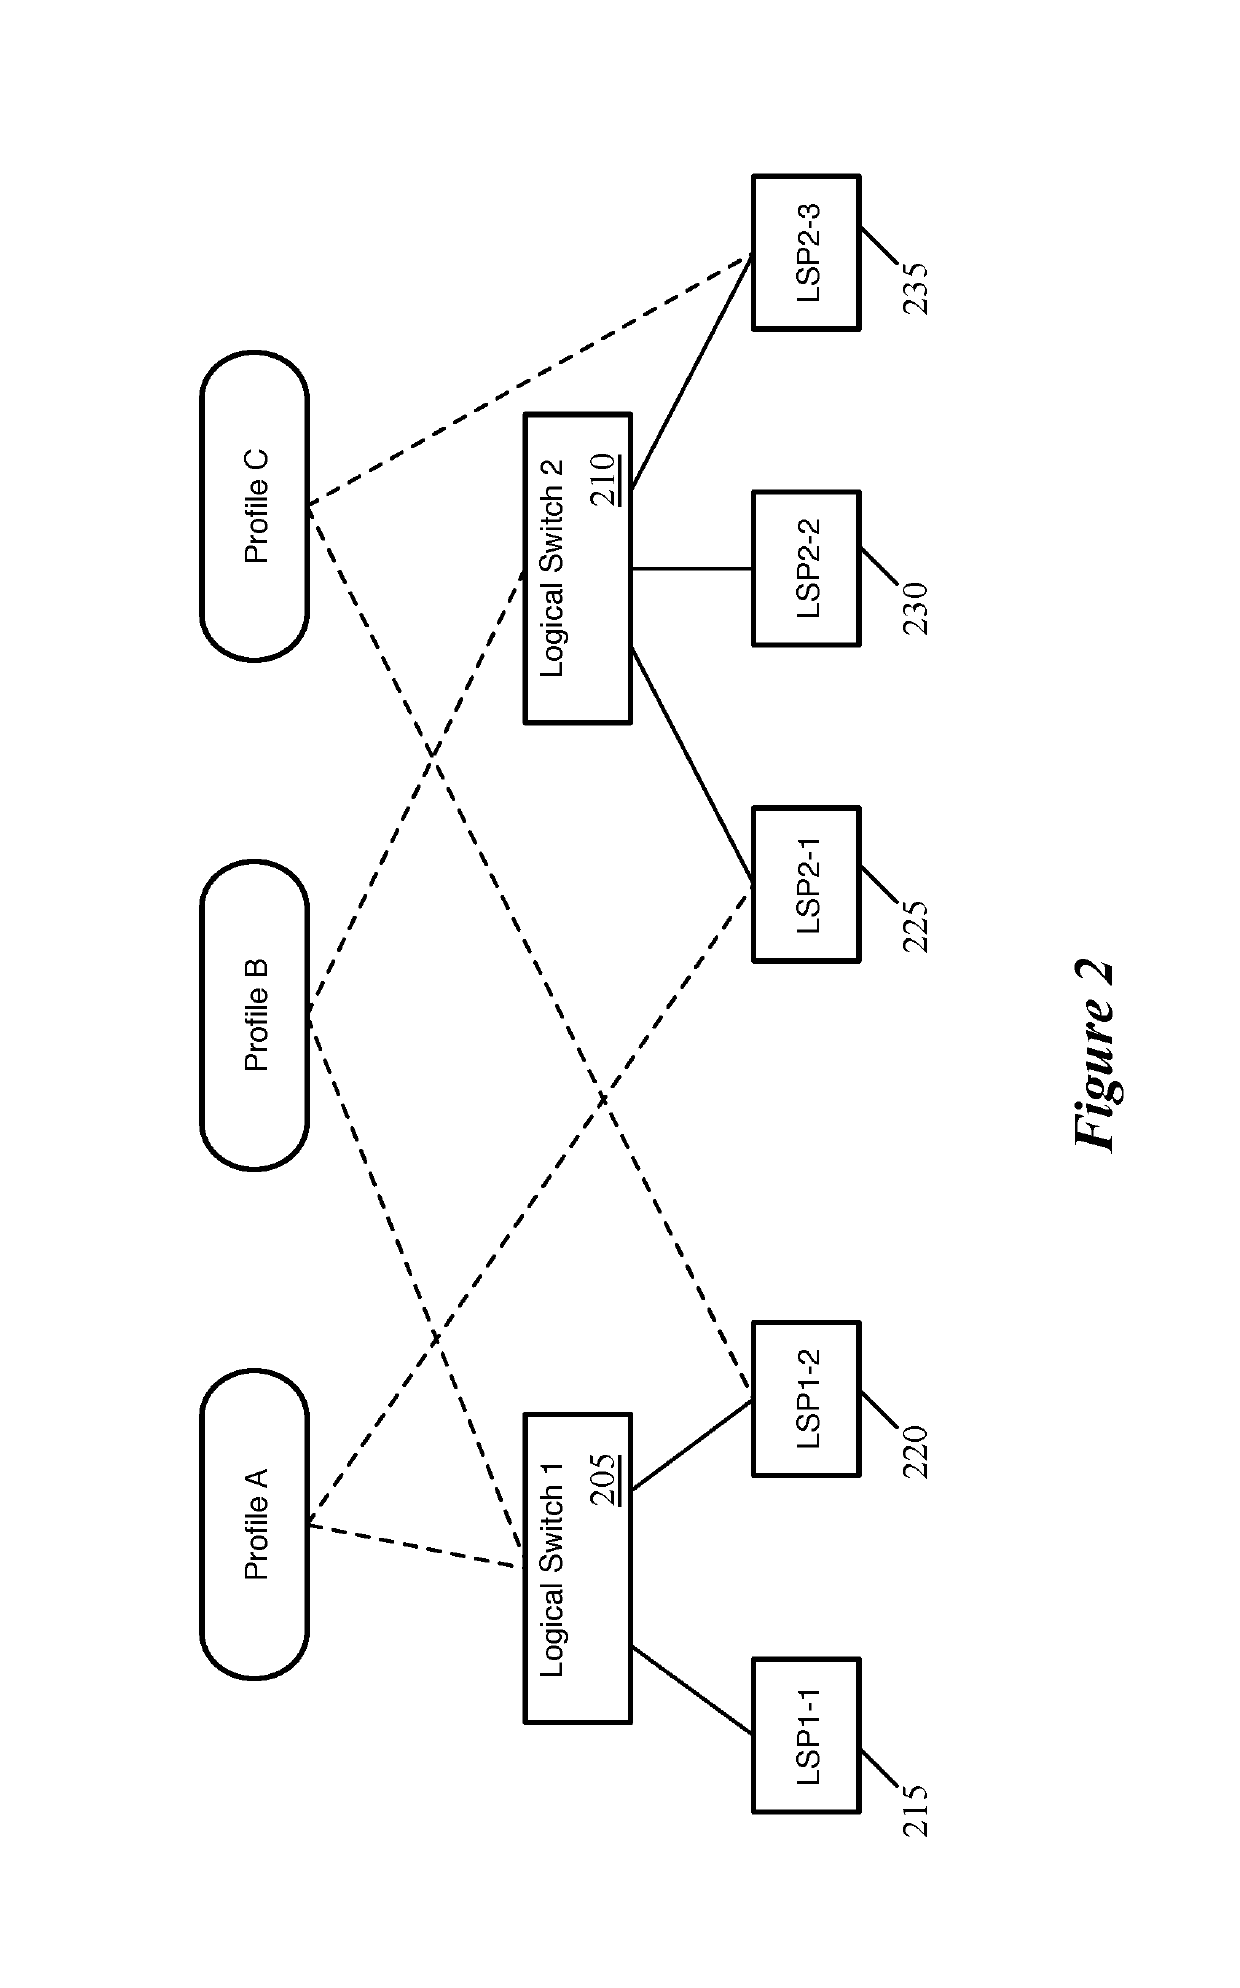 Application of setting profiles to groups of logical network entities